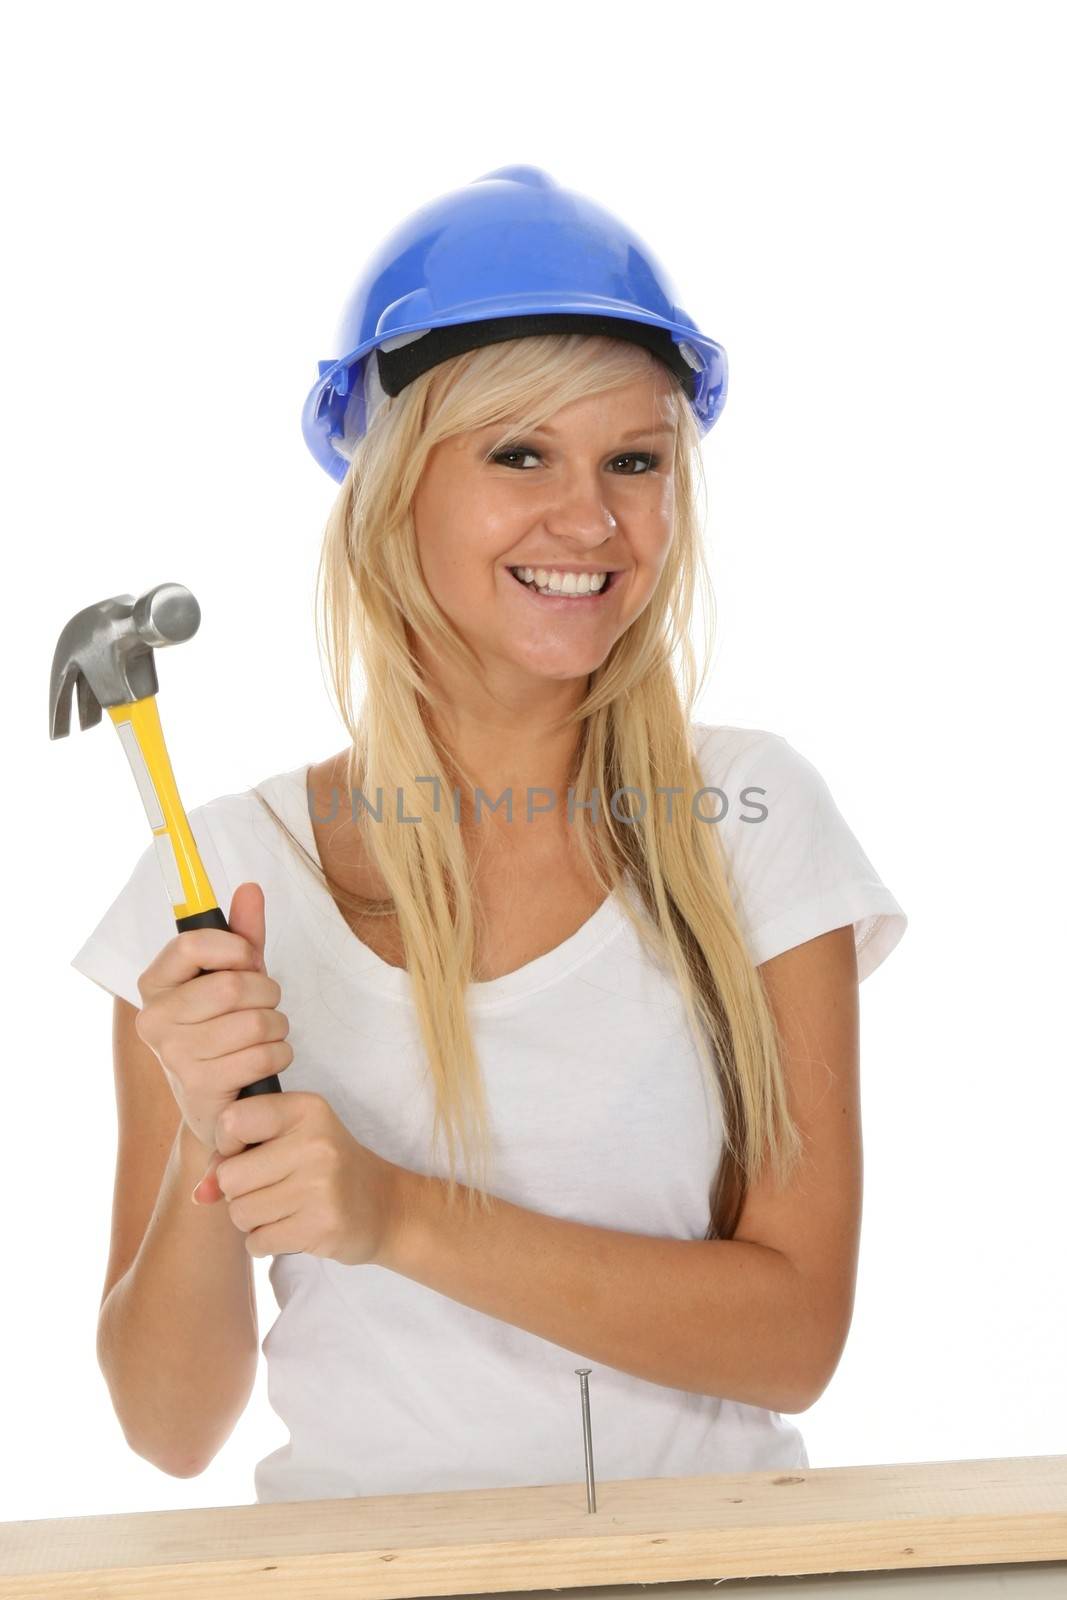 Lovely blond lady hammering in a nail into timber